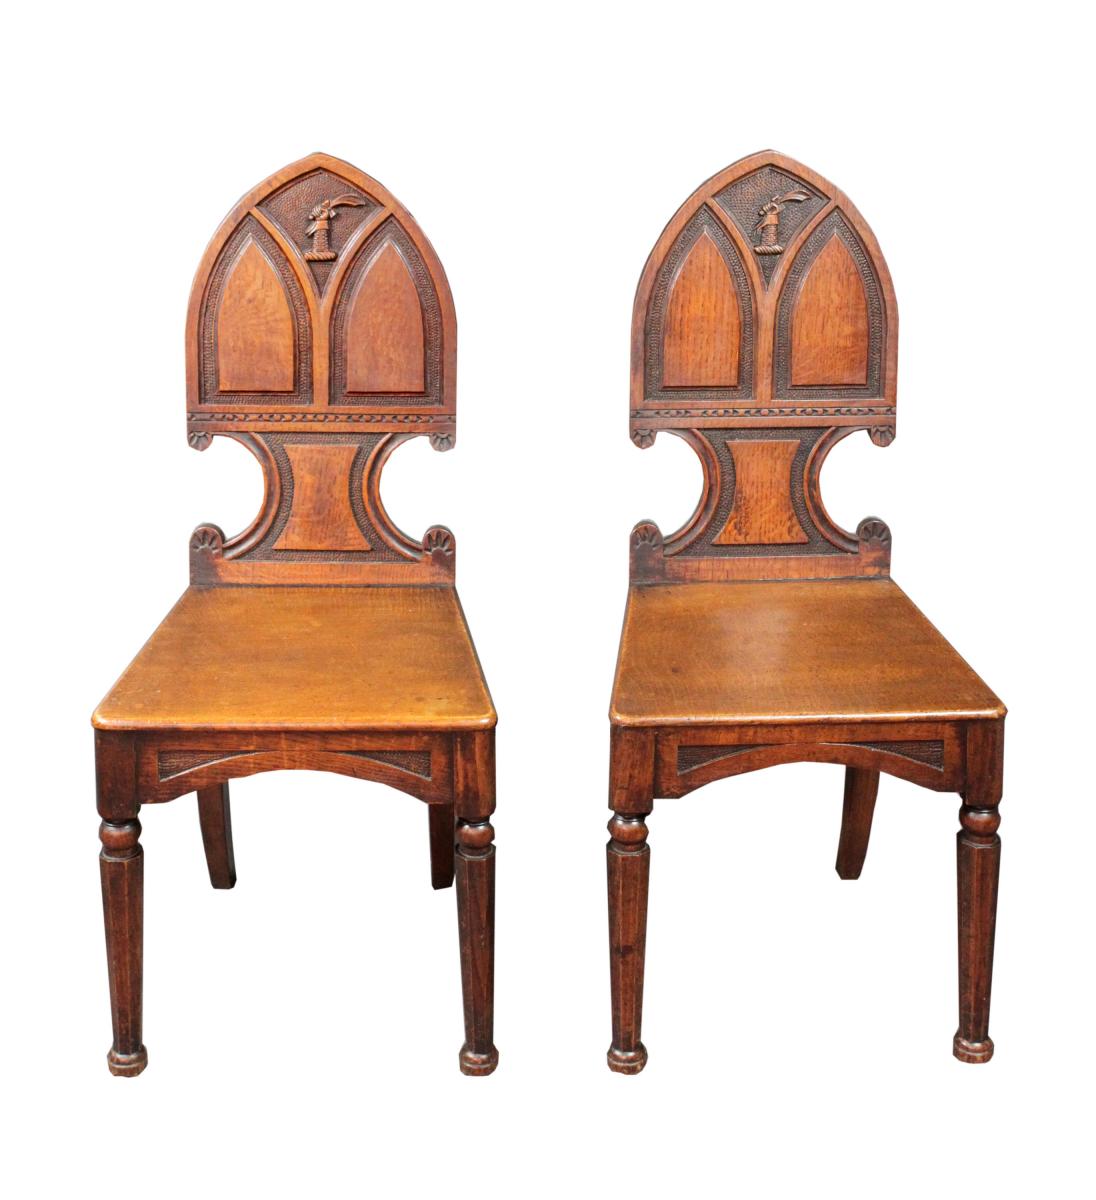 Pair of antique hall chairs